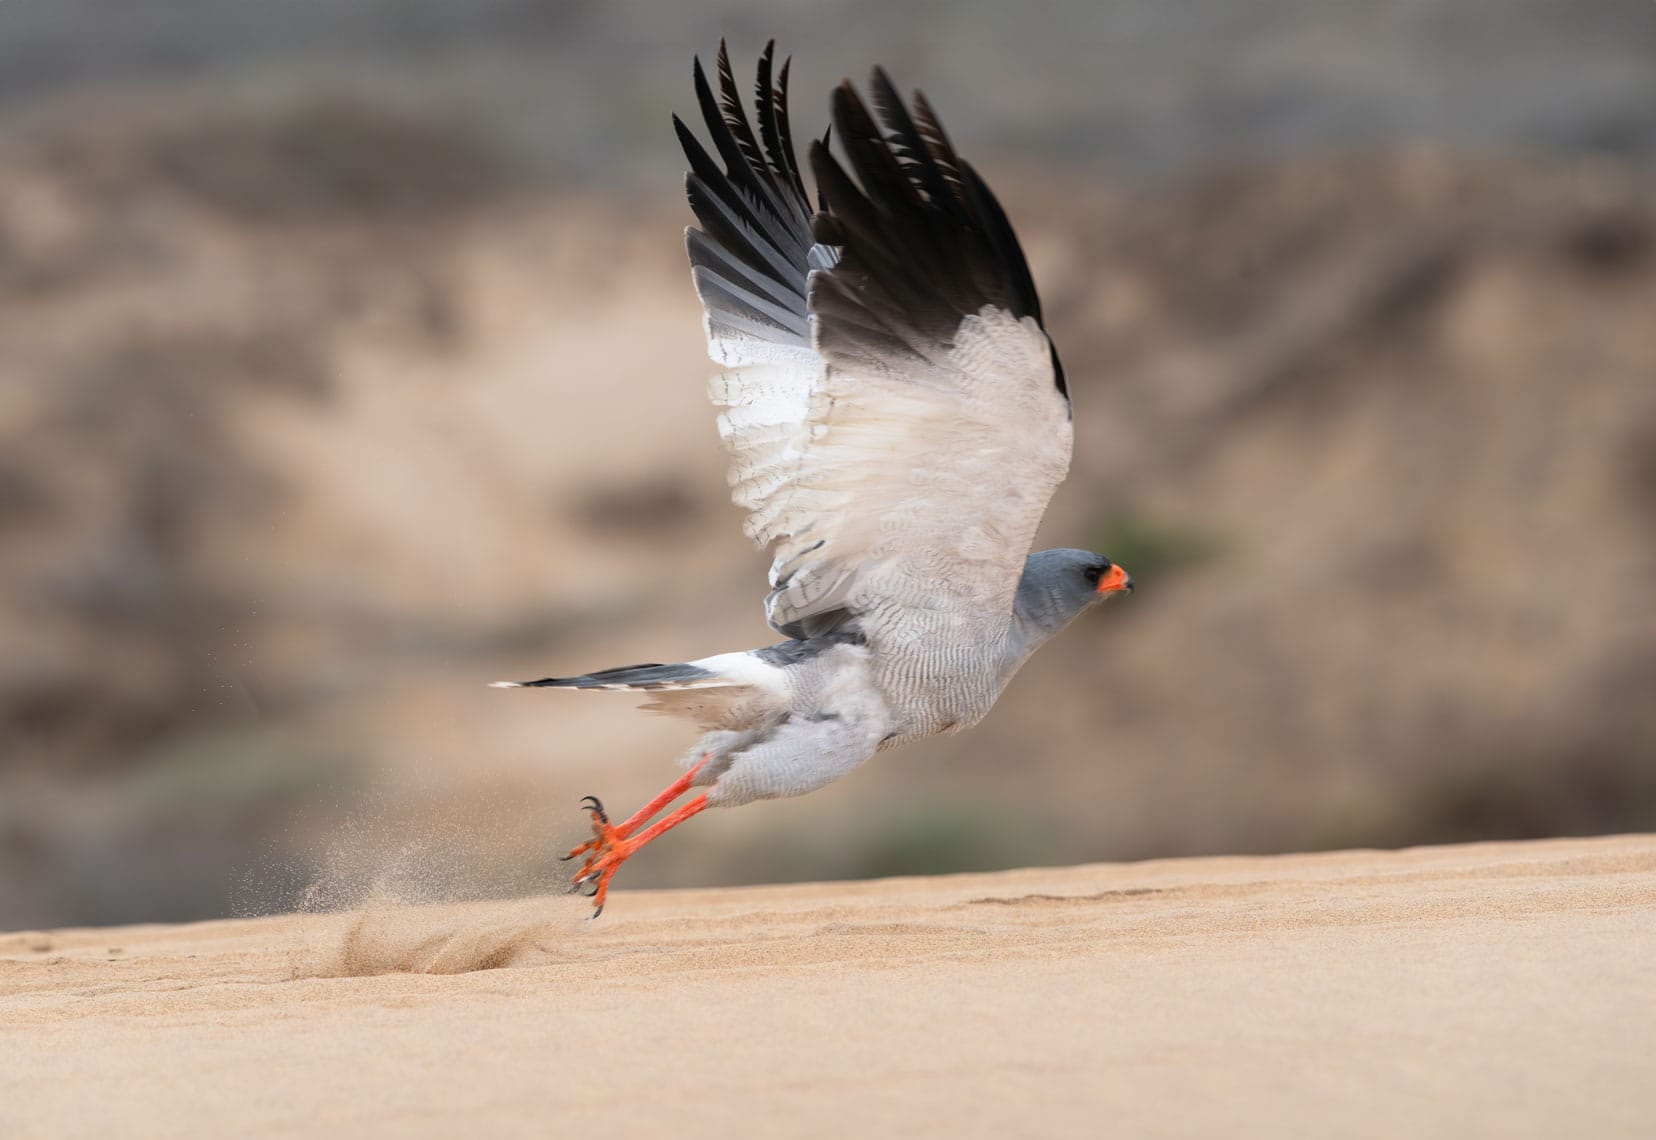 Southern Pale Chanting Goshawk taking off from sand